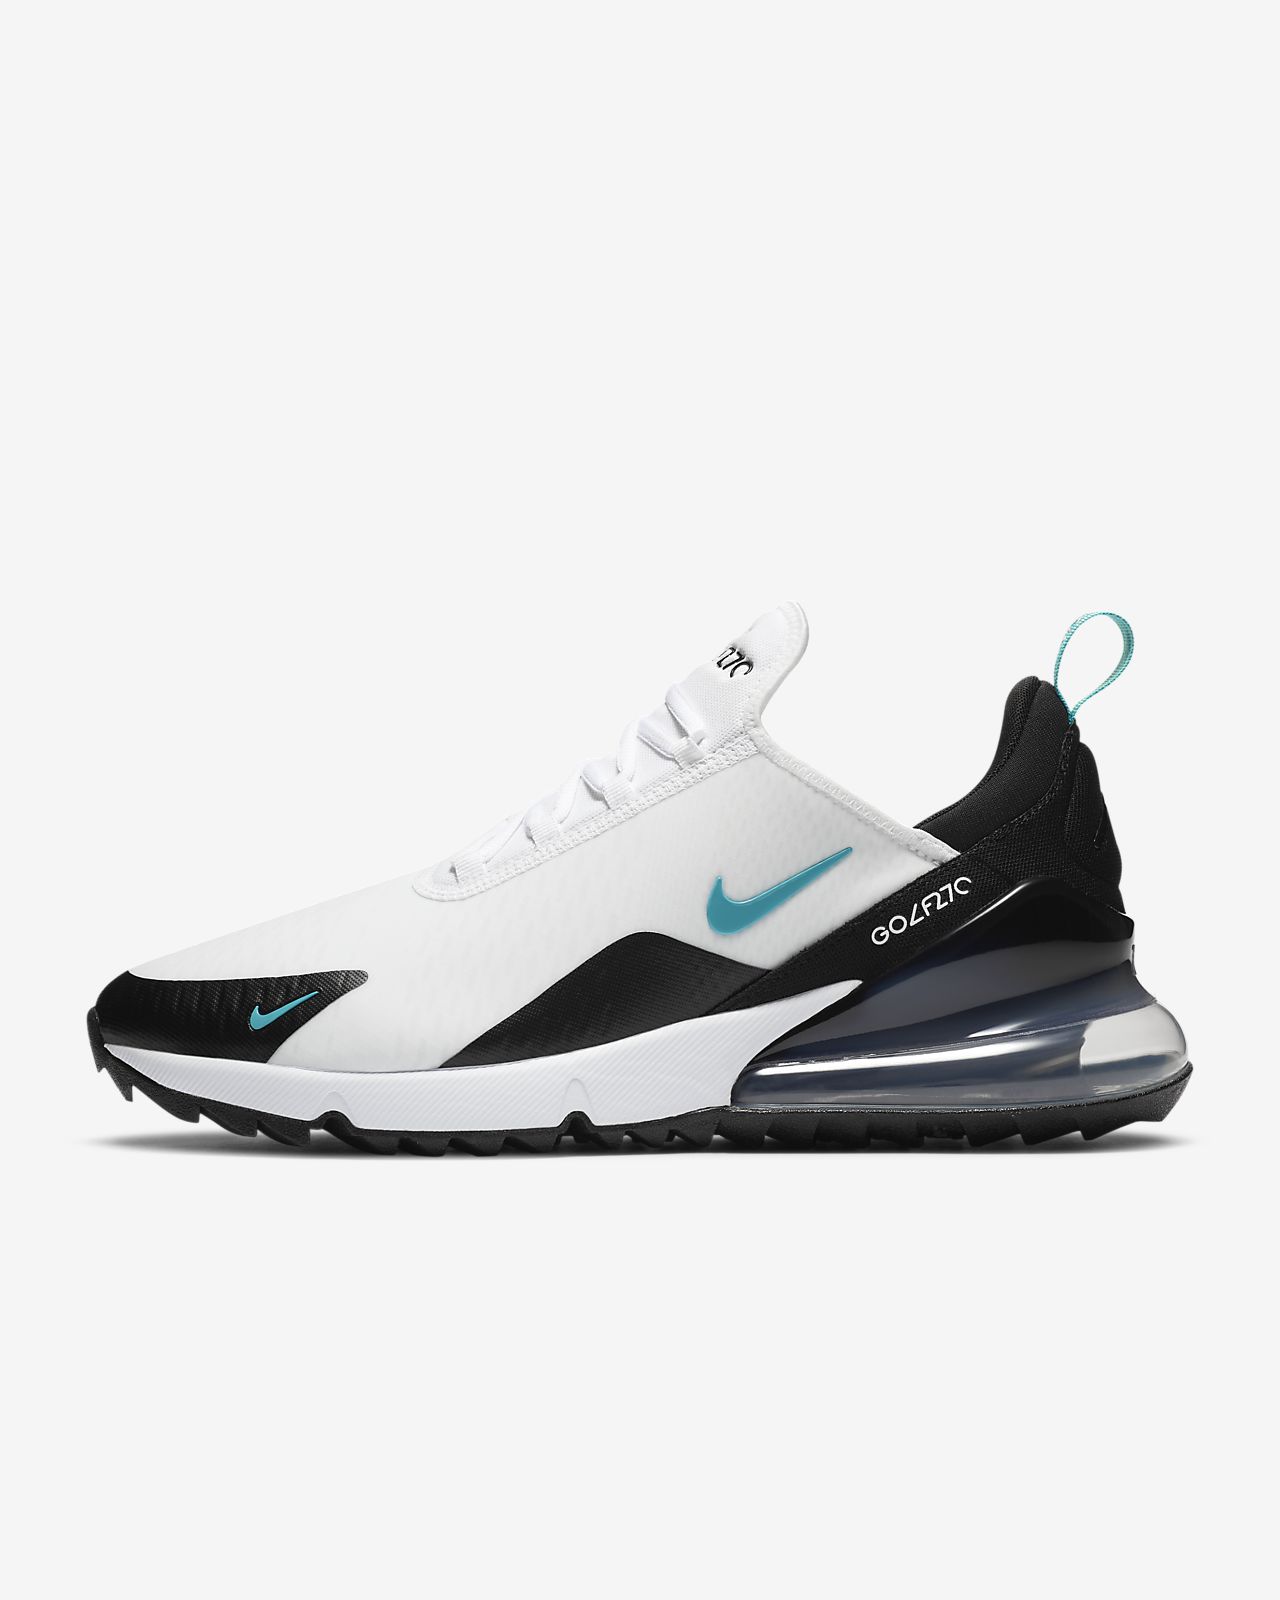  NIKE  Official Nike  Air  Max  270 G Golf Shoe  Online store 